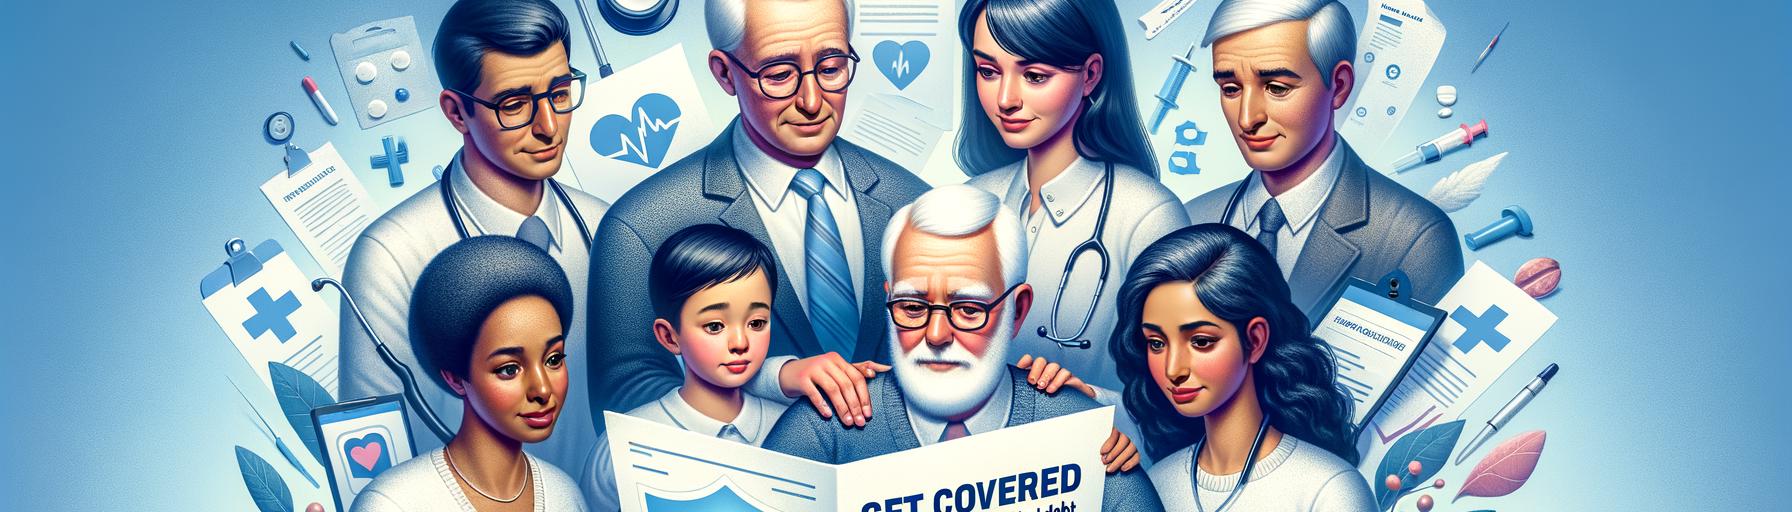 Banner image showing a diverse group of people reviewing health insurance documents with medical icons, symbolizing protectio